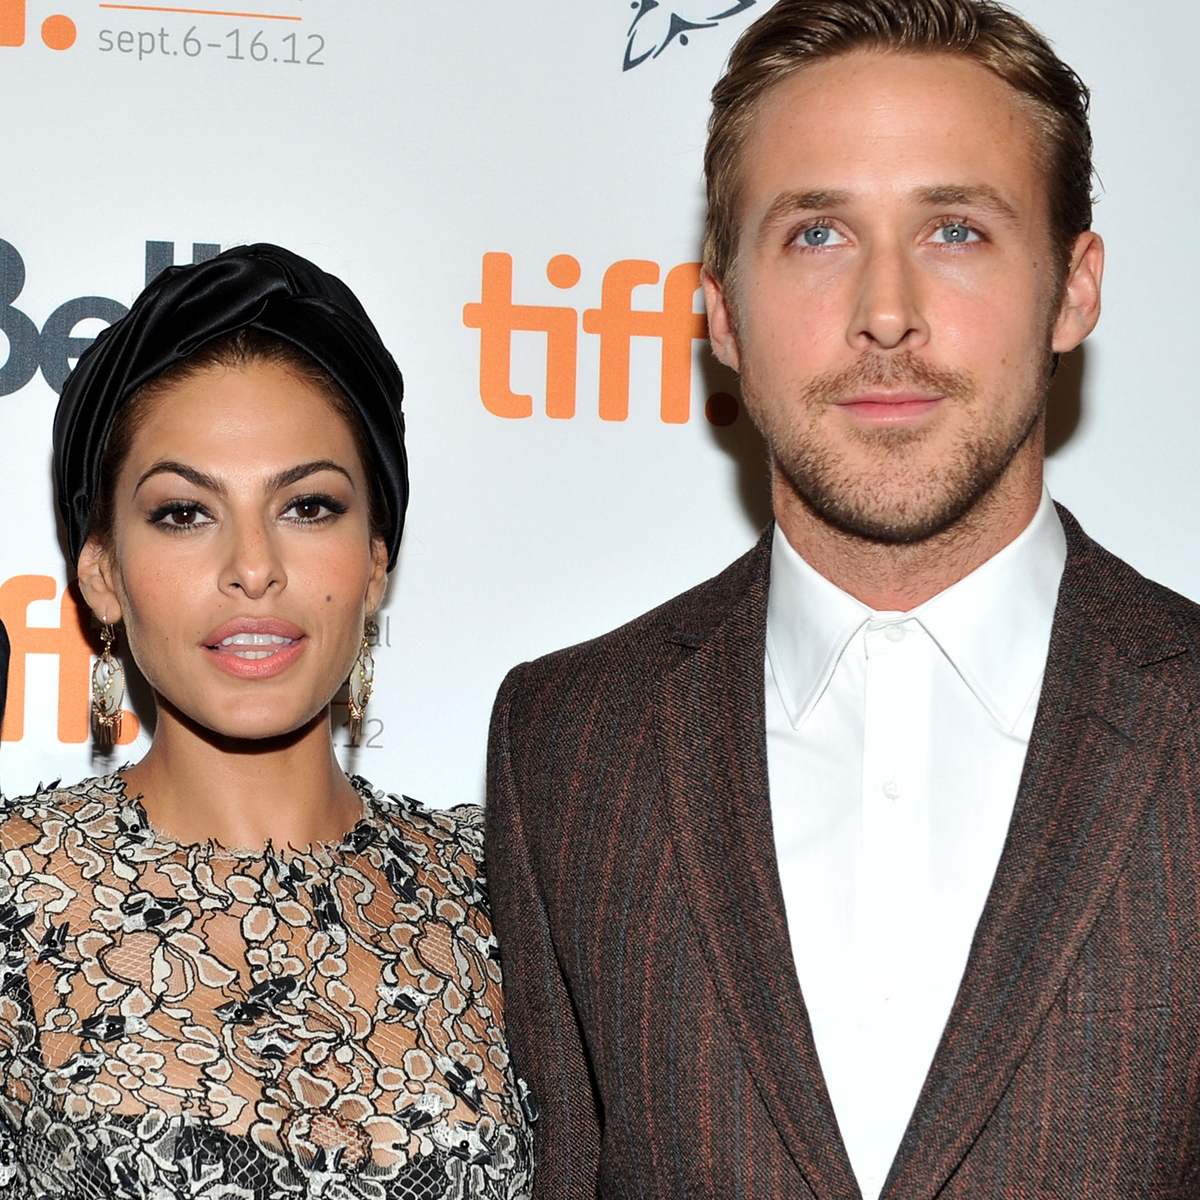 Eva Mendes Has an Iconic Reaction to Ryan Gosling's "I'm Just Ken" Oscars Performance